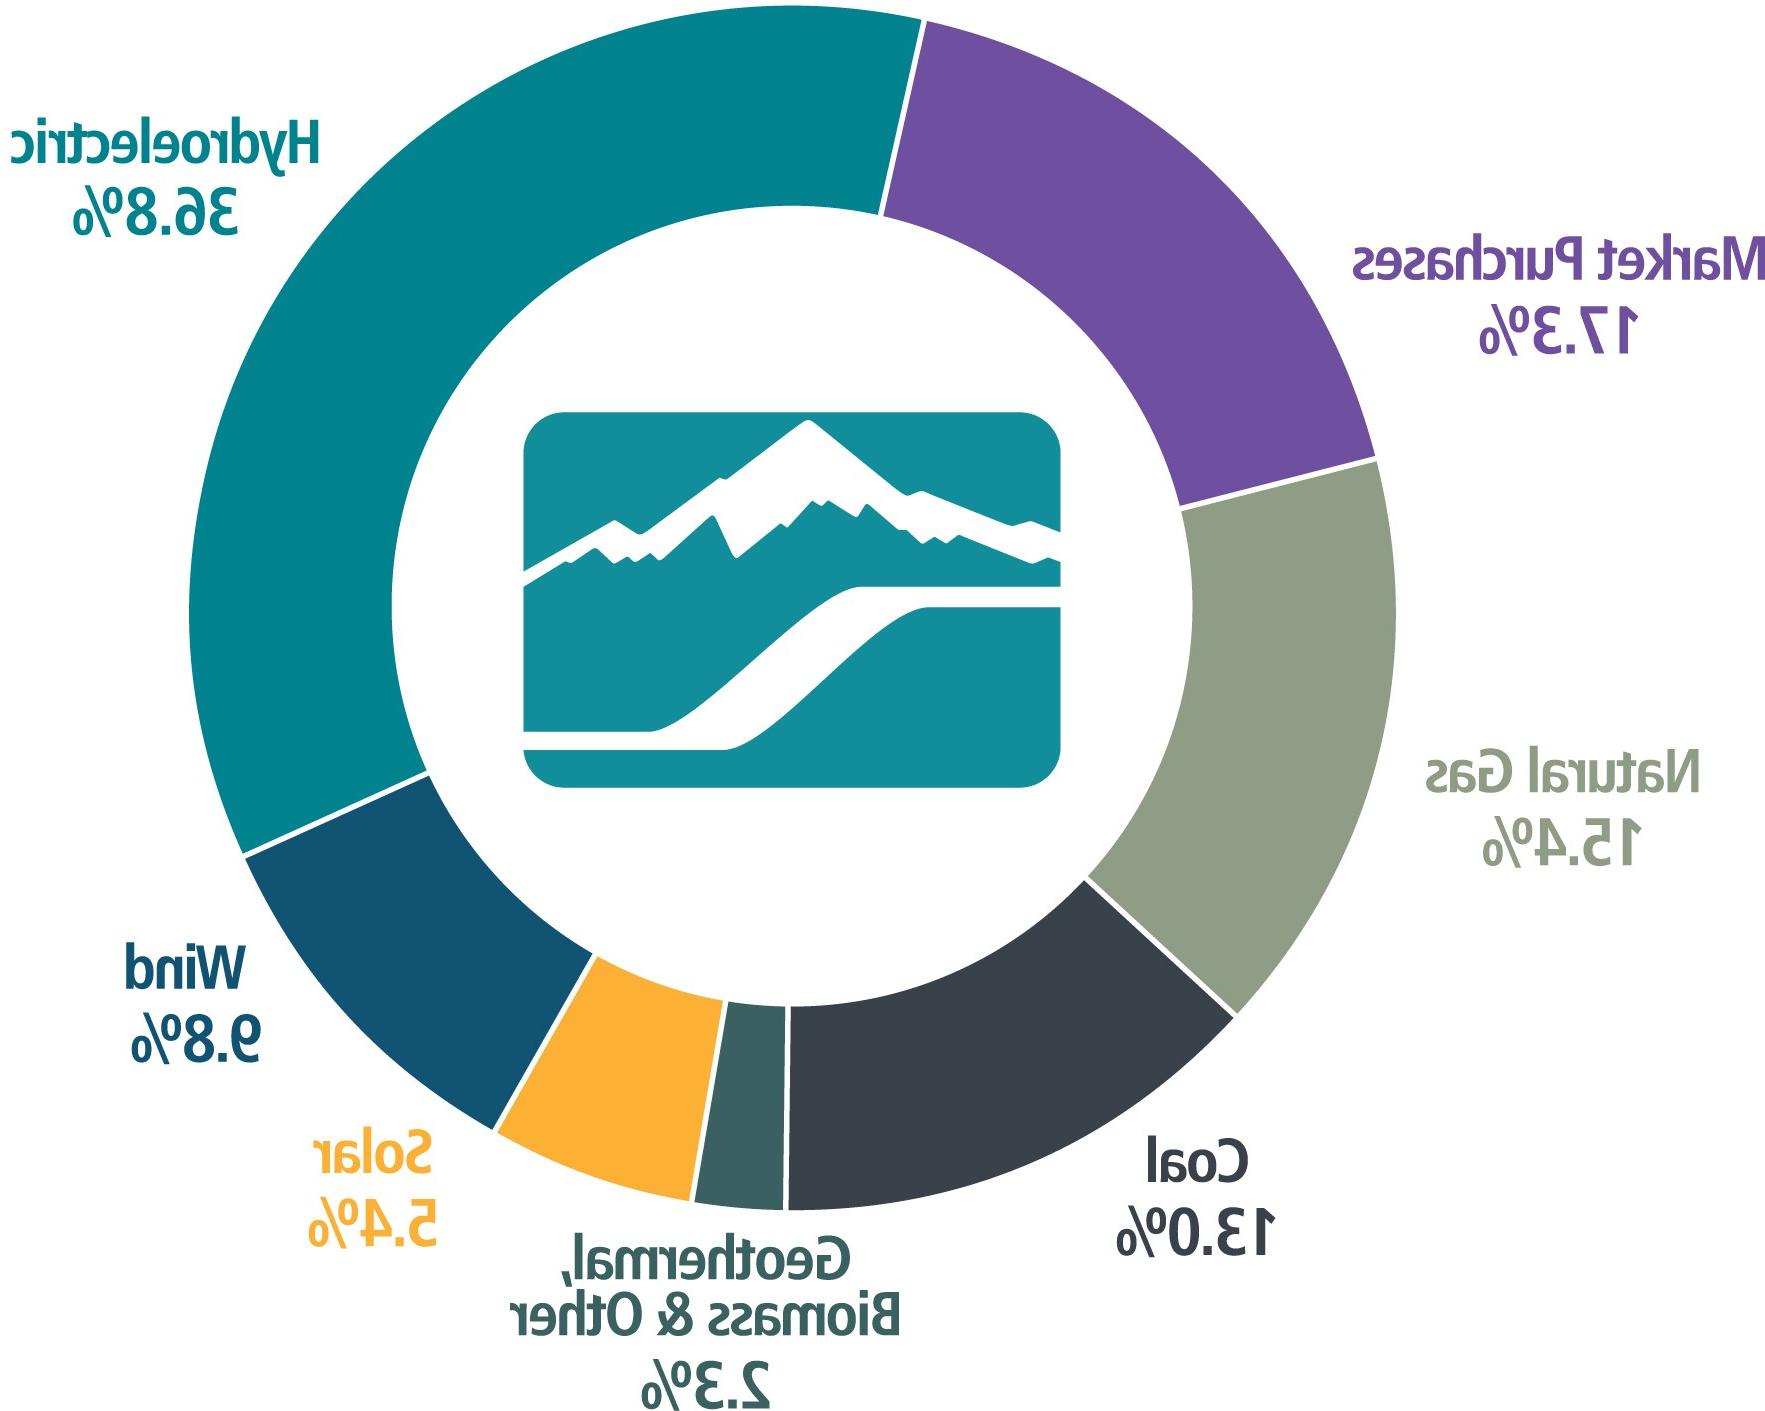 donut chart showing 2022 Idaho Power energy mix: 31.1% hydro, 10% wind, 3.8% solar, 2.3% geothermal/biomass/other, 19.9% coal, 12.6% natural gas, and 20.3% market purchases